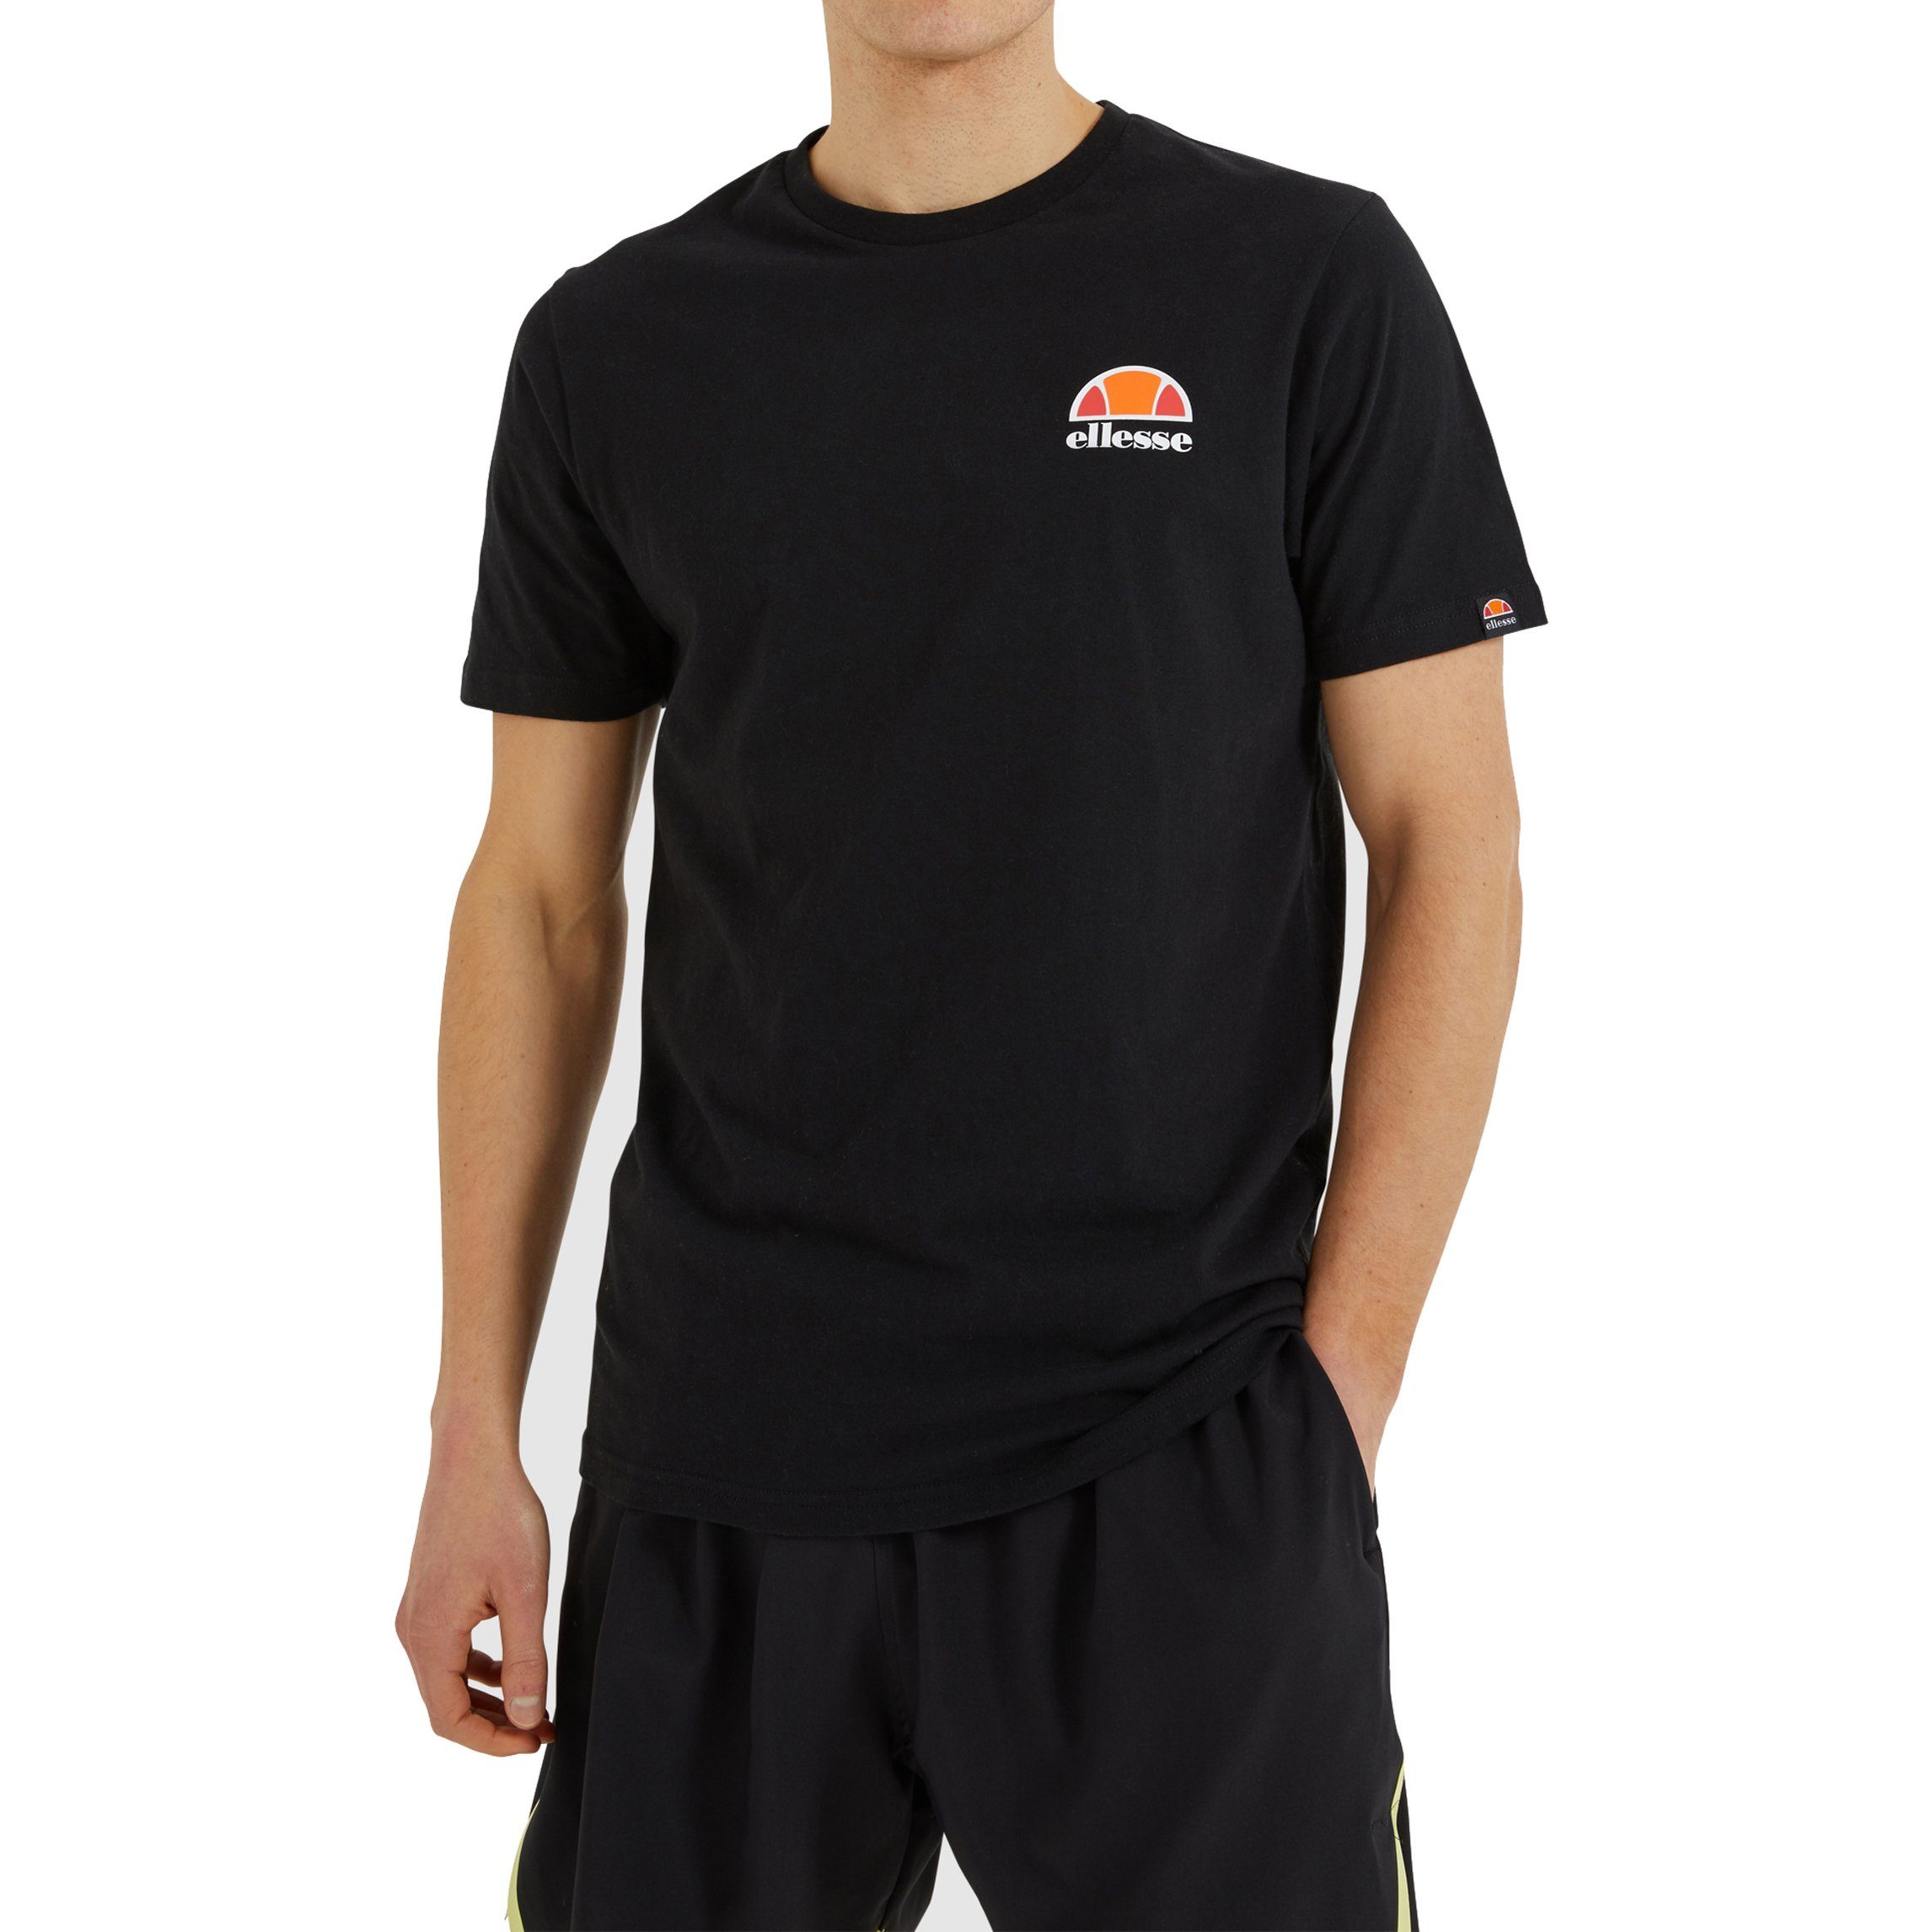 Ellesse Poloshirt Tee Canaletto anthracite